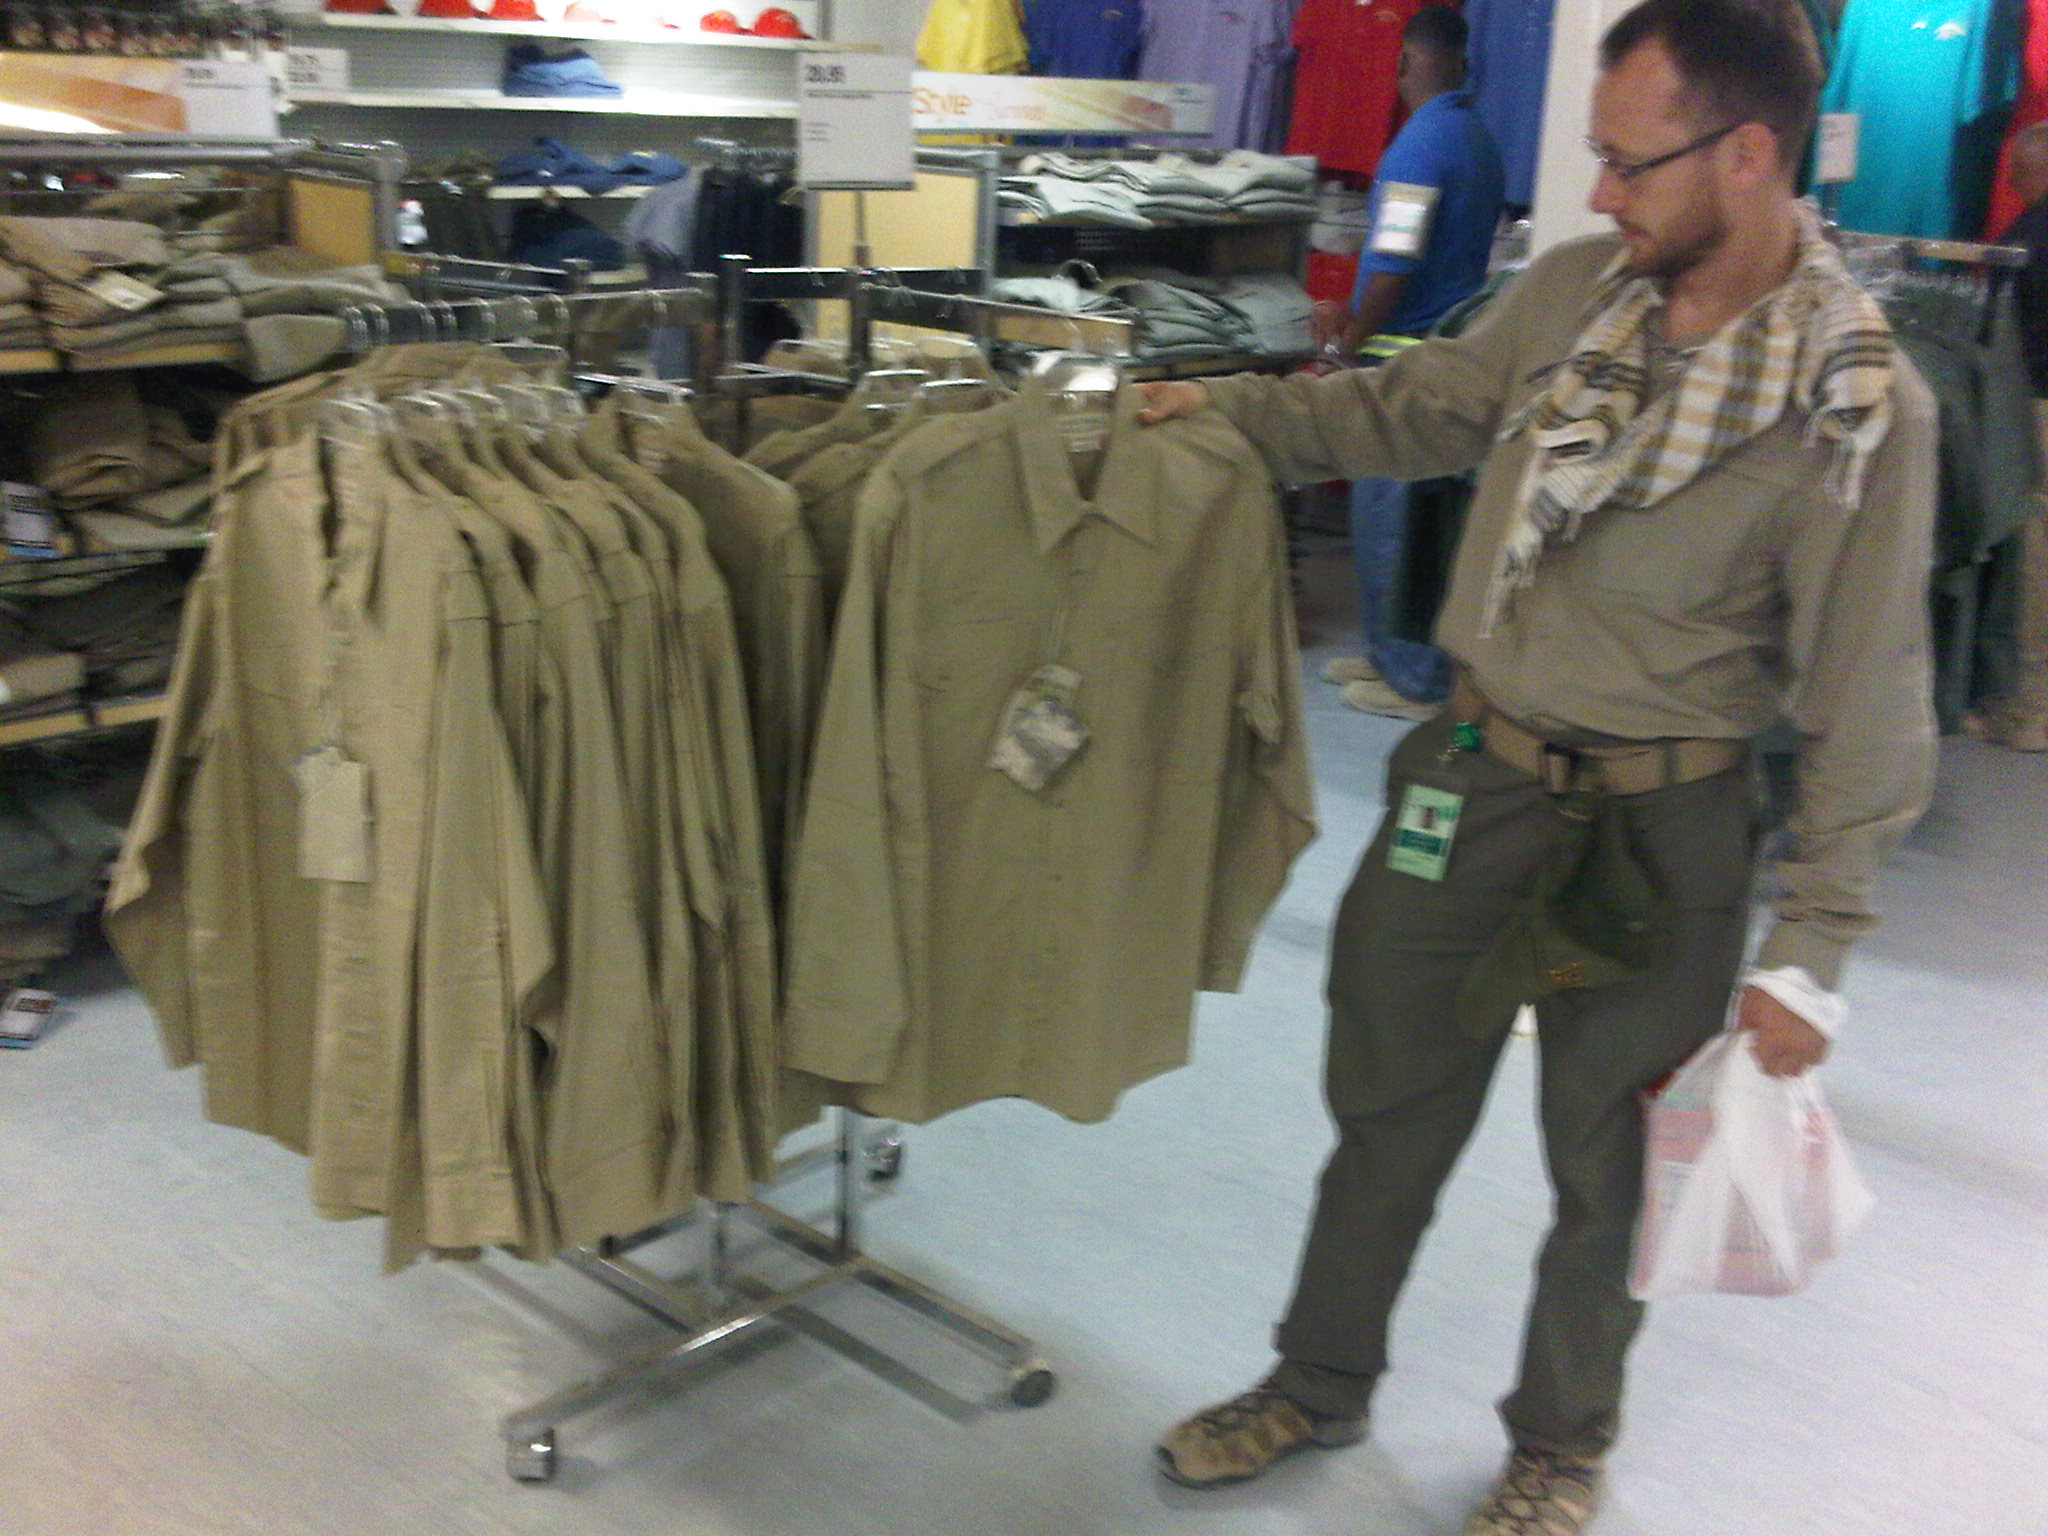 Our Brand and my designs all on display, softlines section Task Force Gear in Kandahar, Air Field PX, Afghanistan